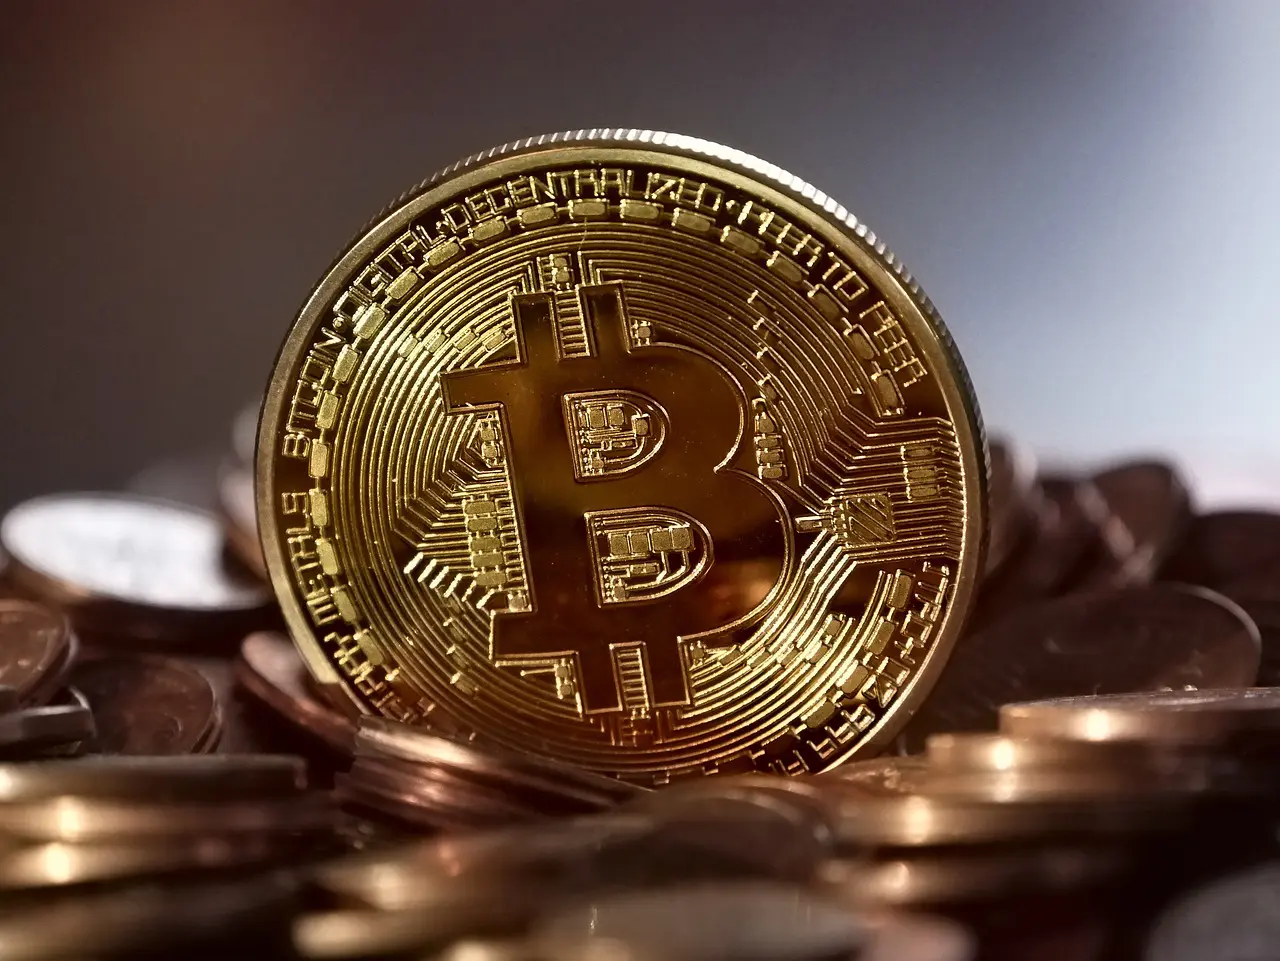 A gold Bitcoin token stands prominently in the foreground among various other coins.